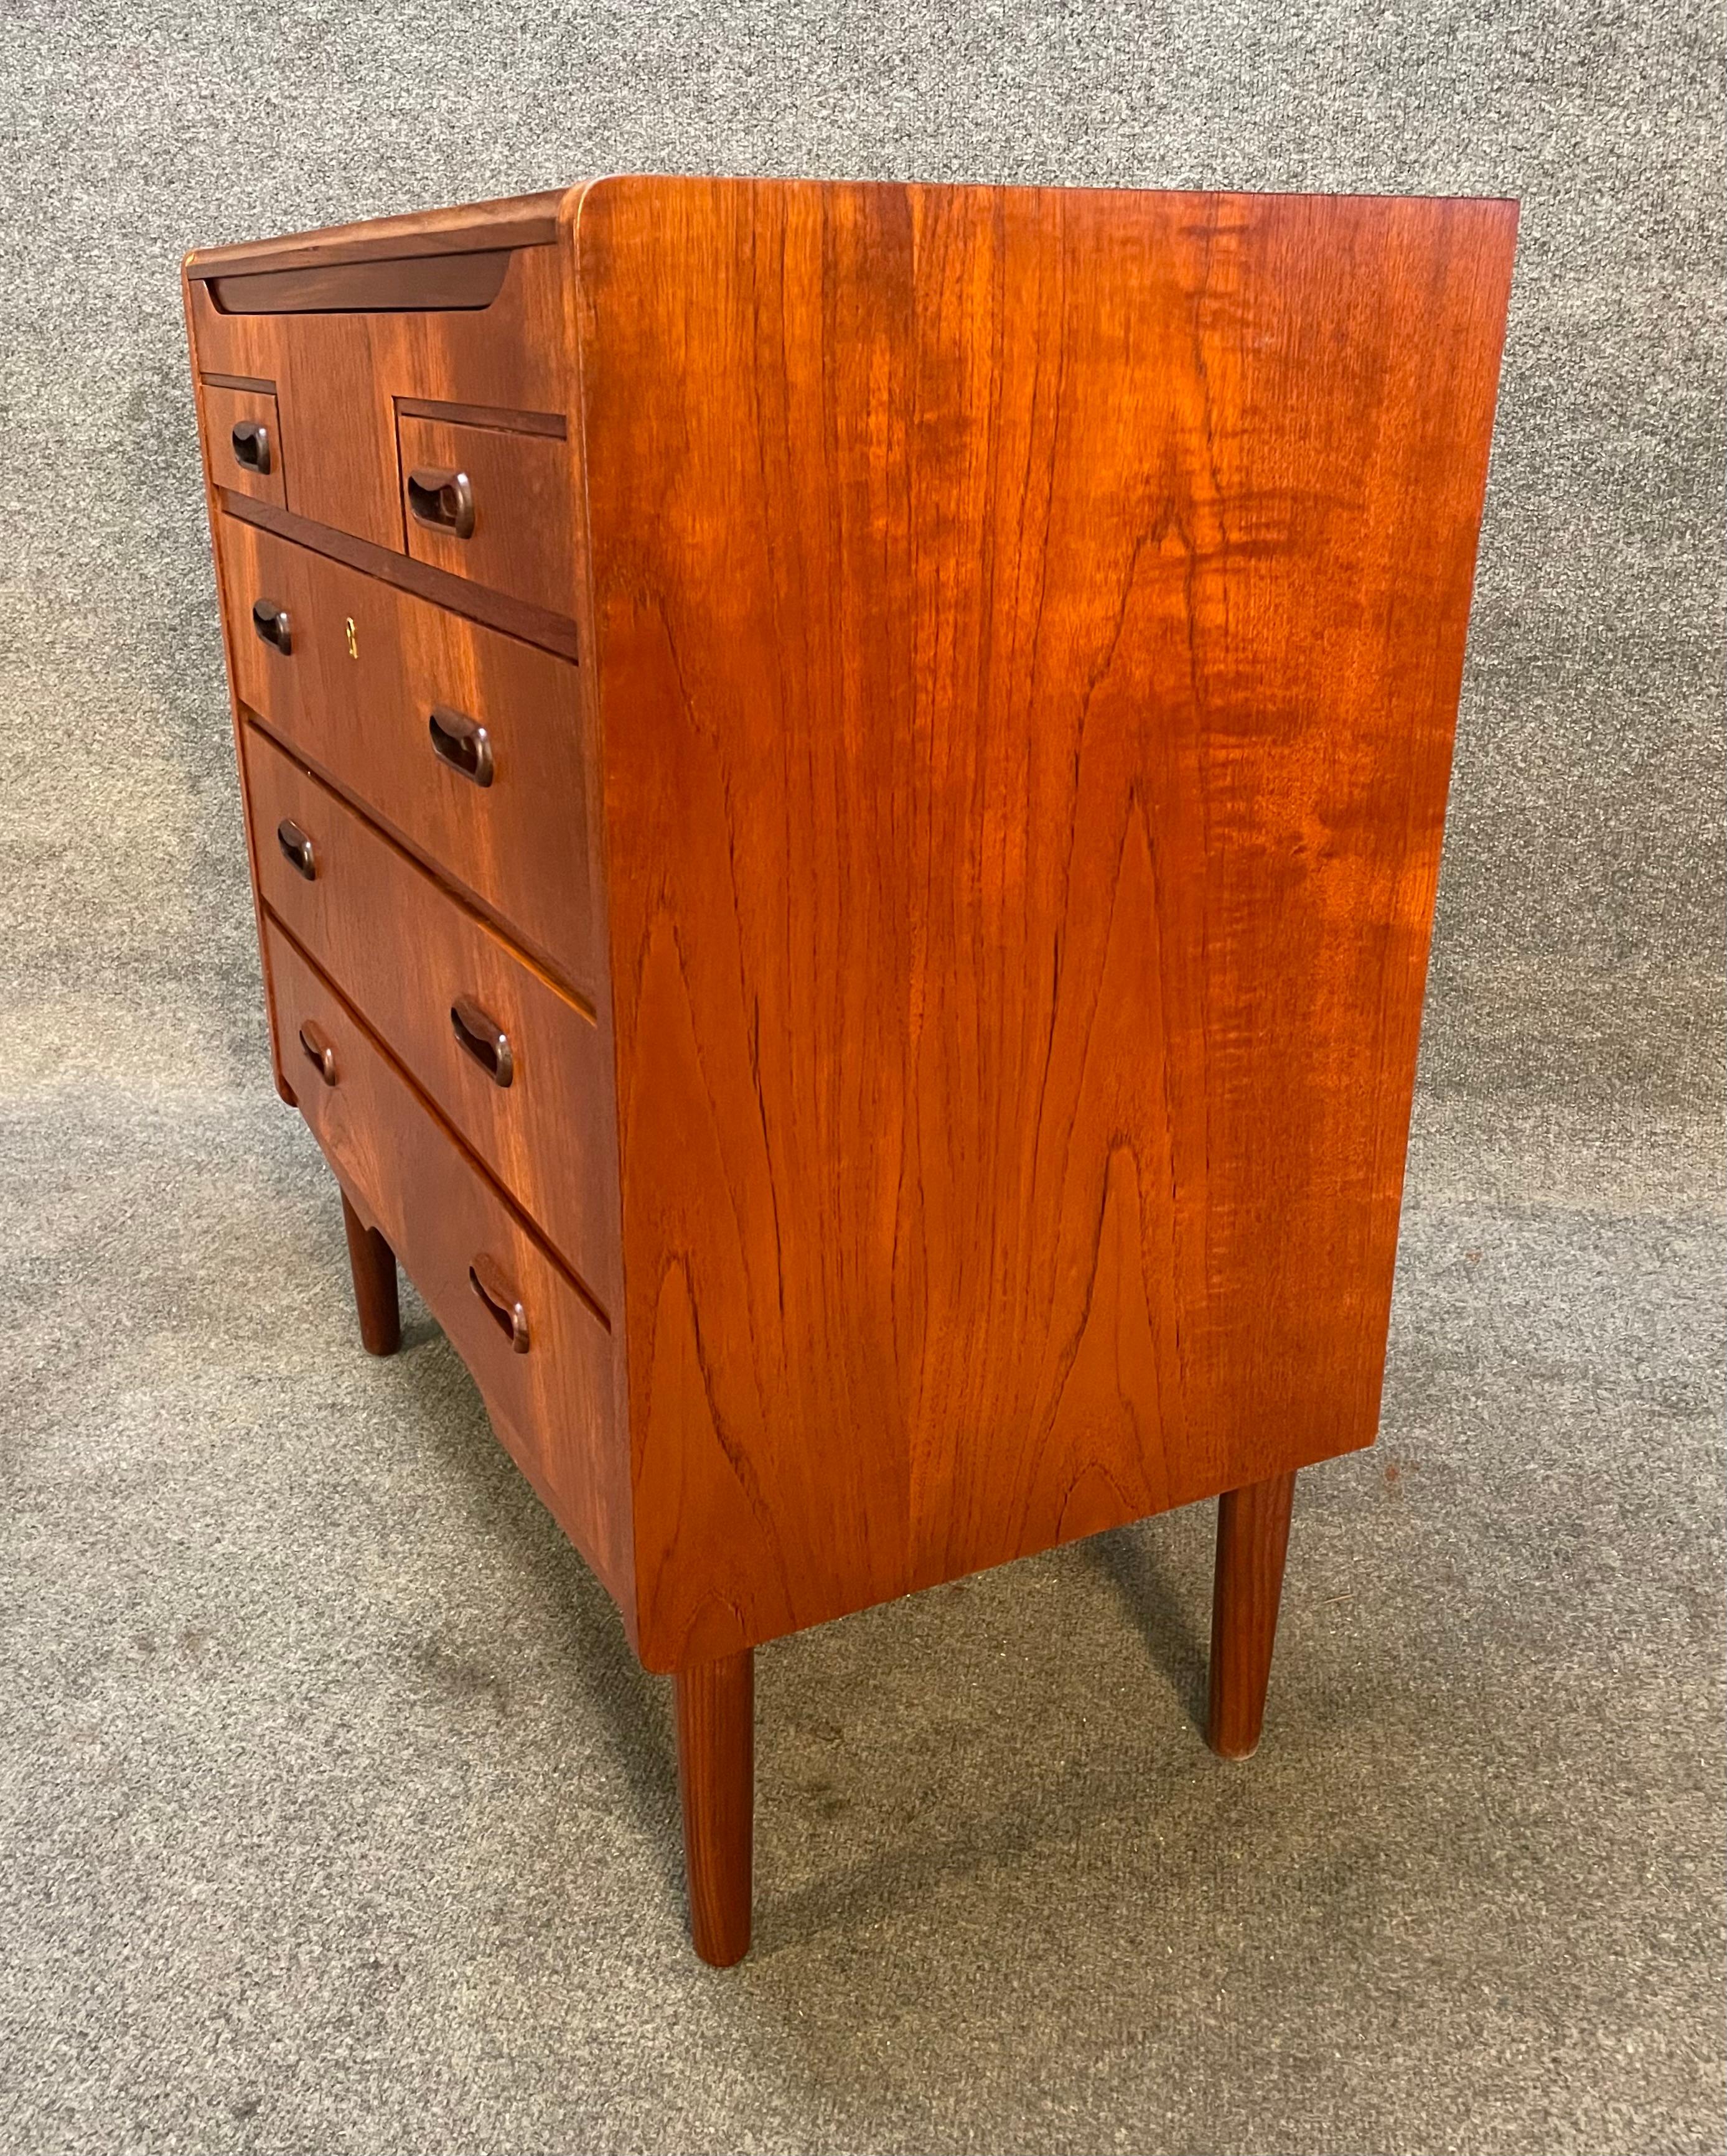 Here is a beautiful 1960's scandinavian modern teak low dresser - dressing table manufactured in Denmark recently imported to California before its refinishing.
This lovely piece features a vibrant wood grain, a lift up top revealing a mirror and